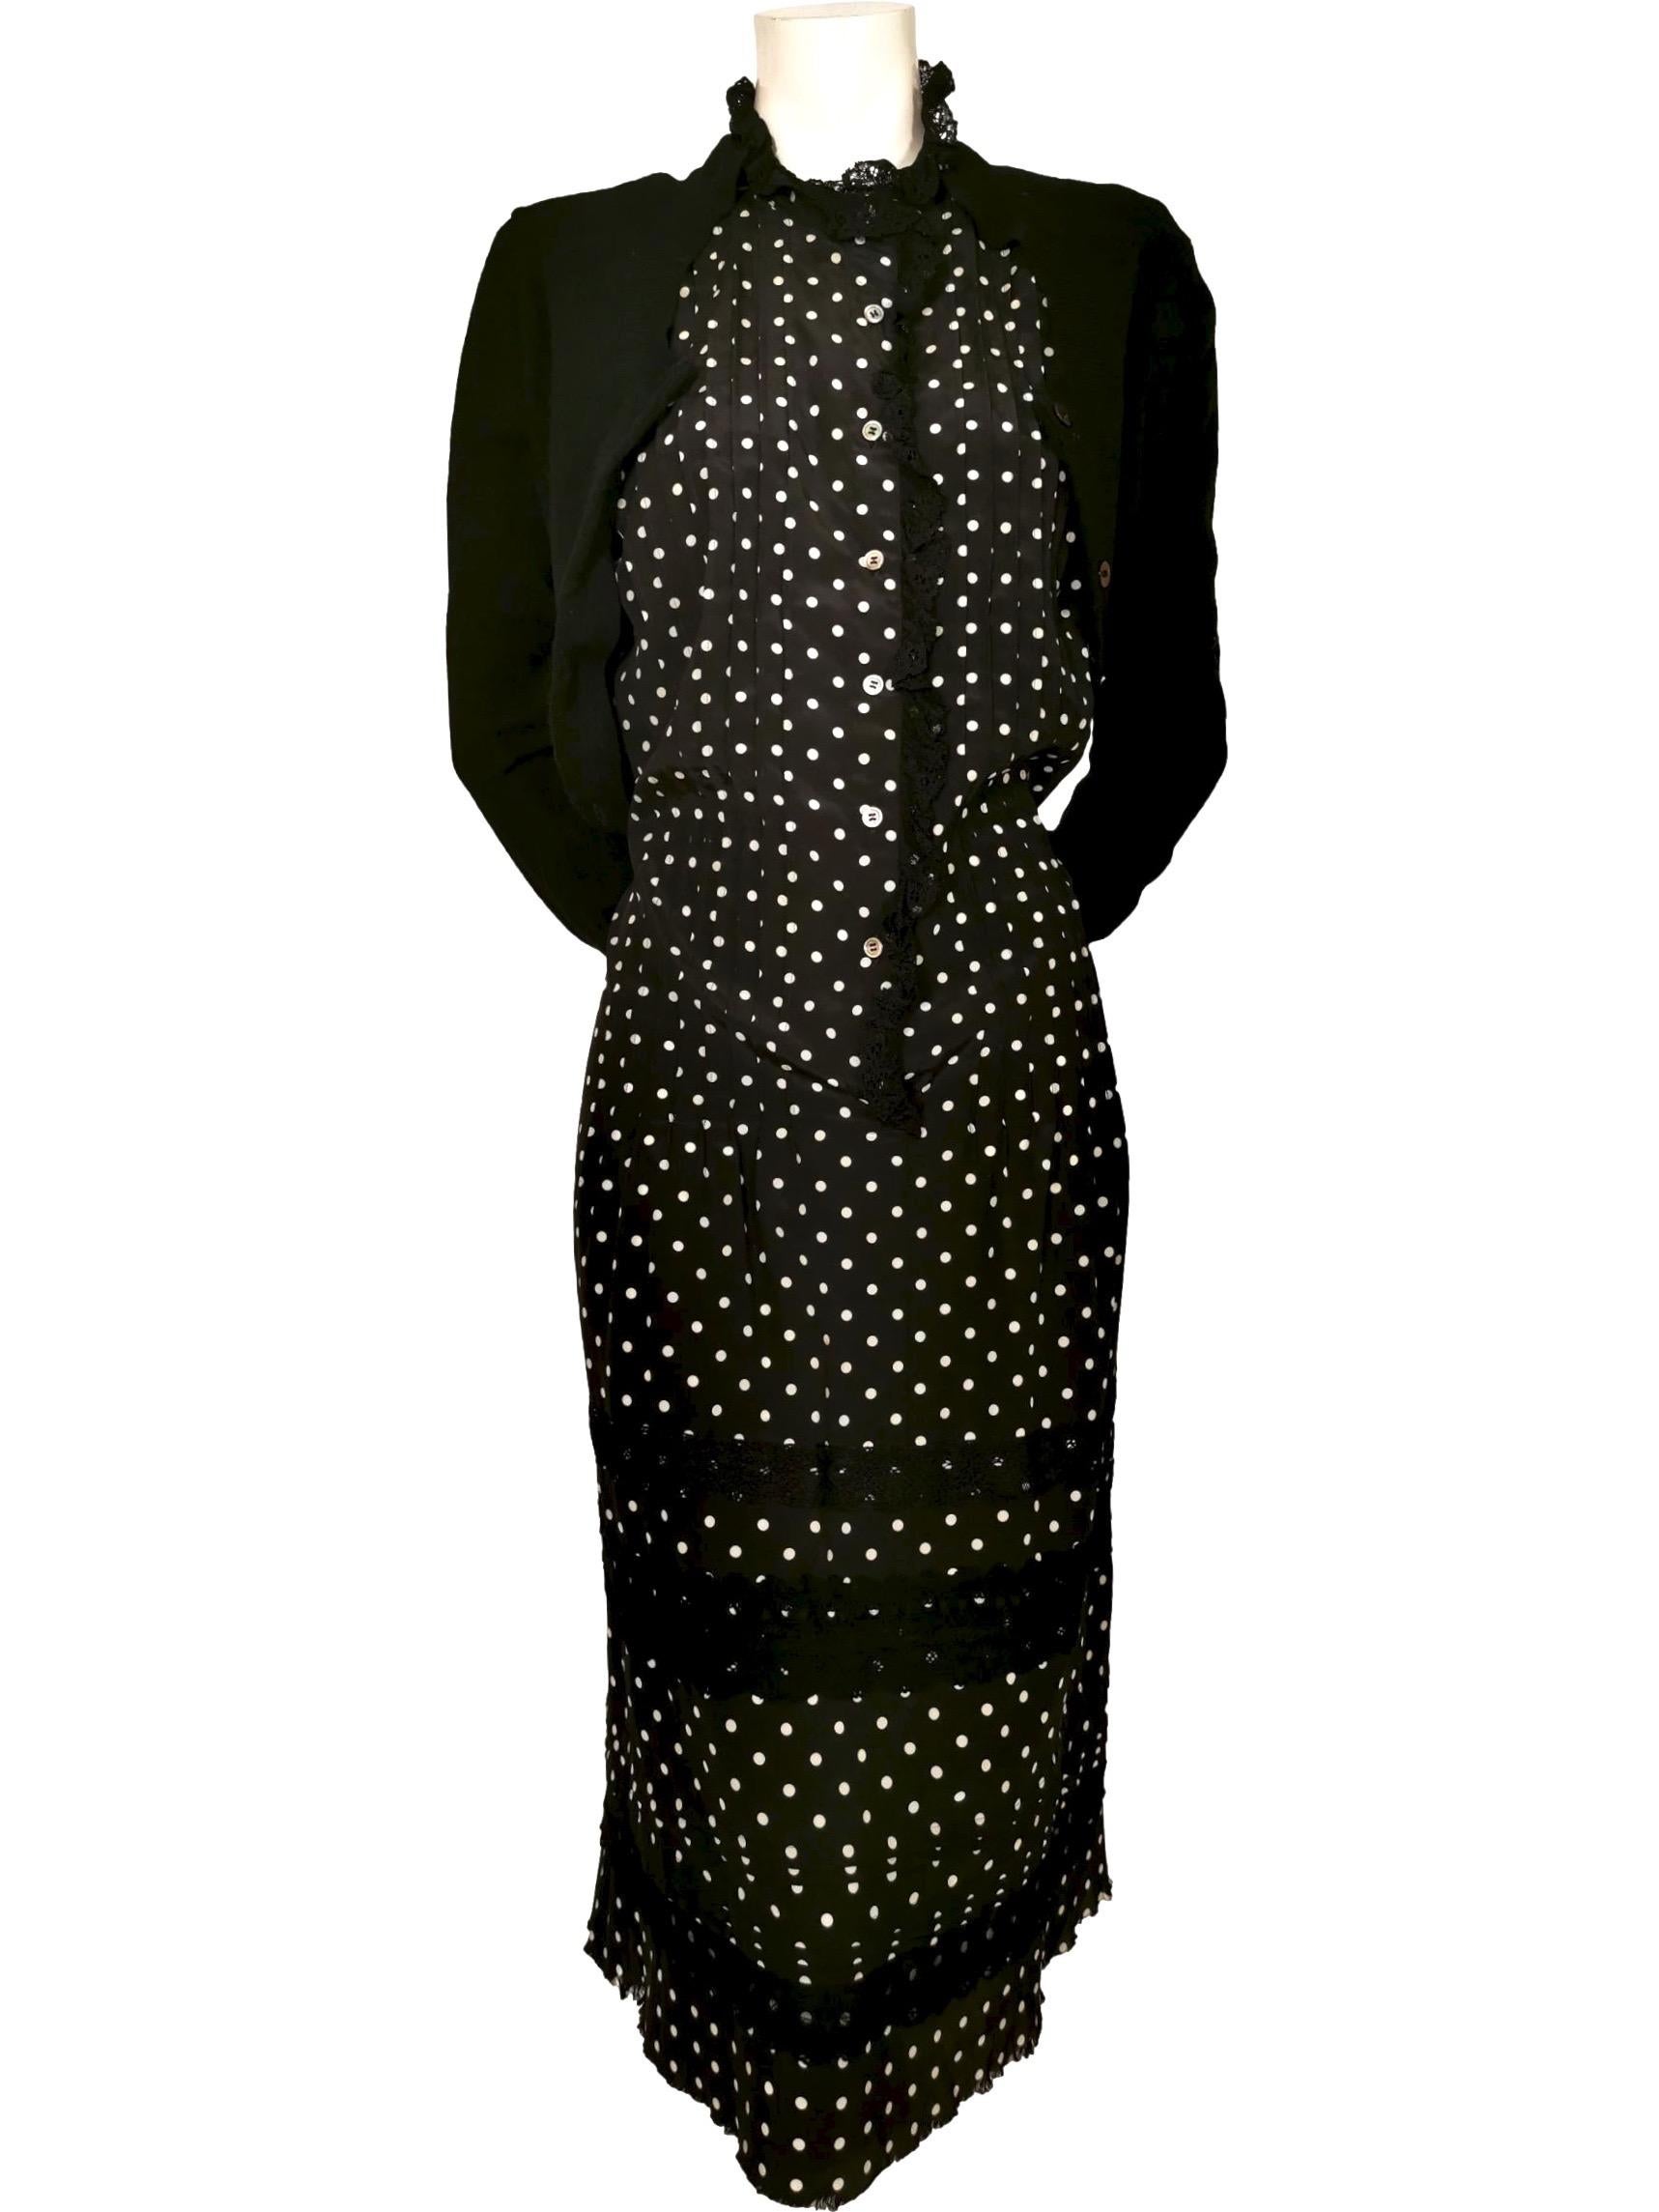 Junya Watanabe Comme des Garcons Twisted Polka Dot Cardigan Dress AD 2007 For Sale 5